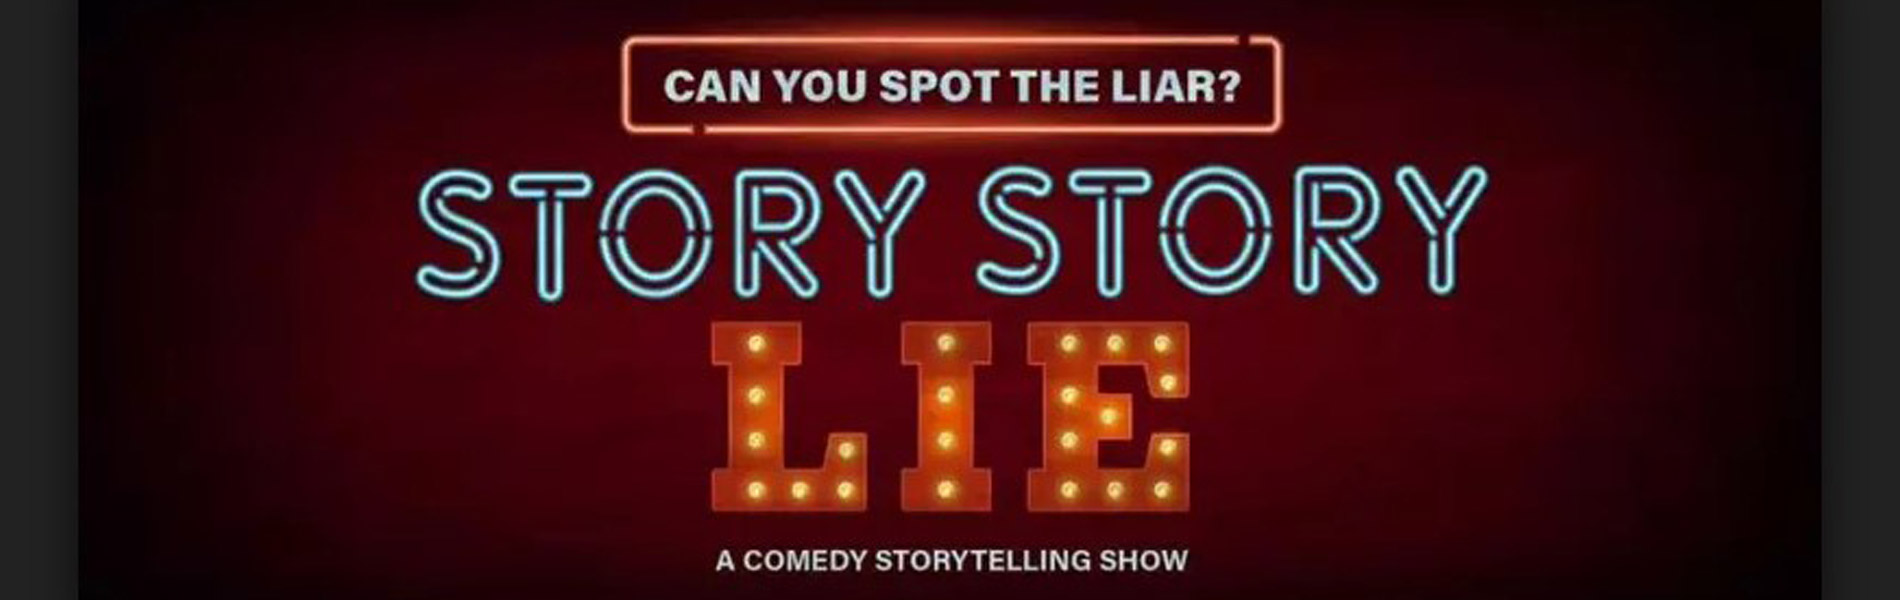 Story Story Drive and Story Story Lie